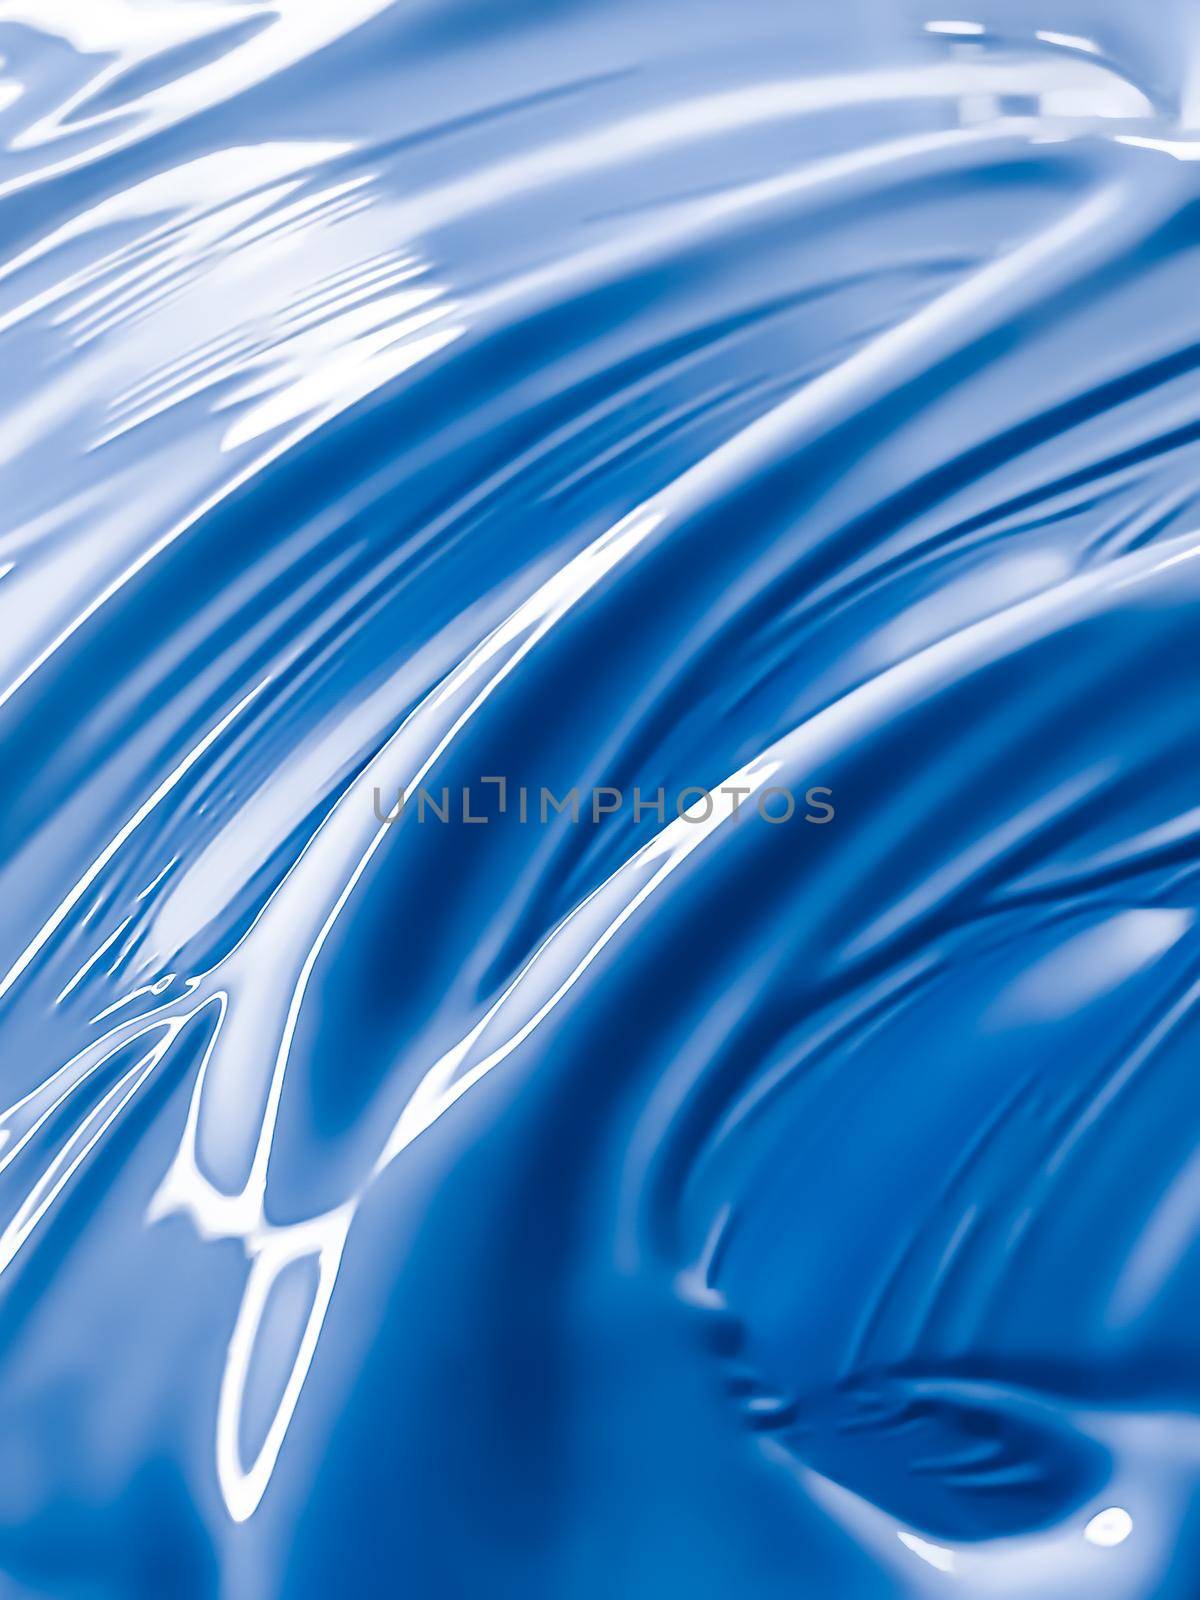 Glossy blue cosmetic texture as beauty make-up product background, cosmetics and luxury makeup brand design by Anneleven